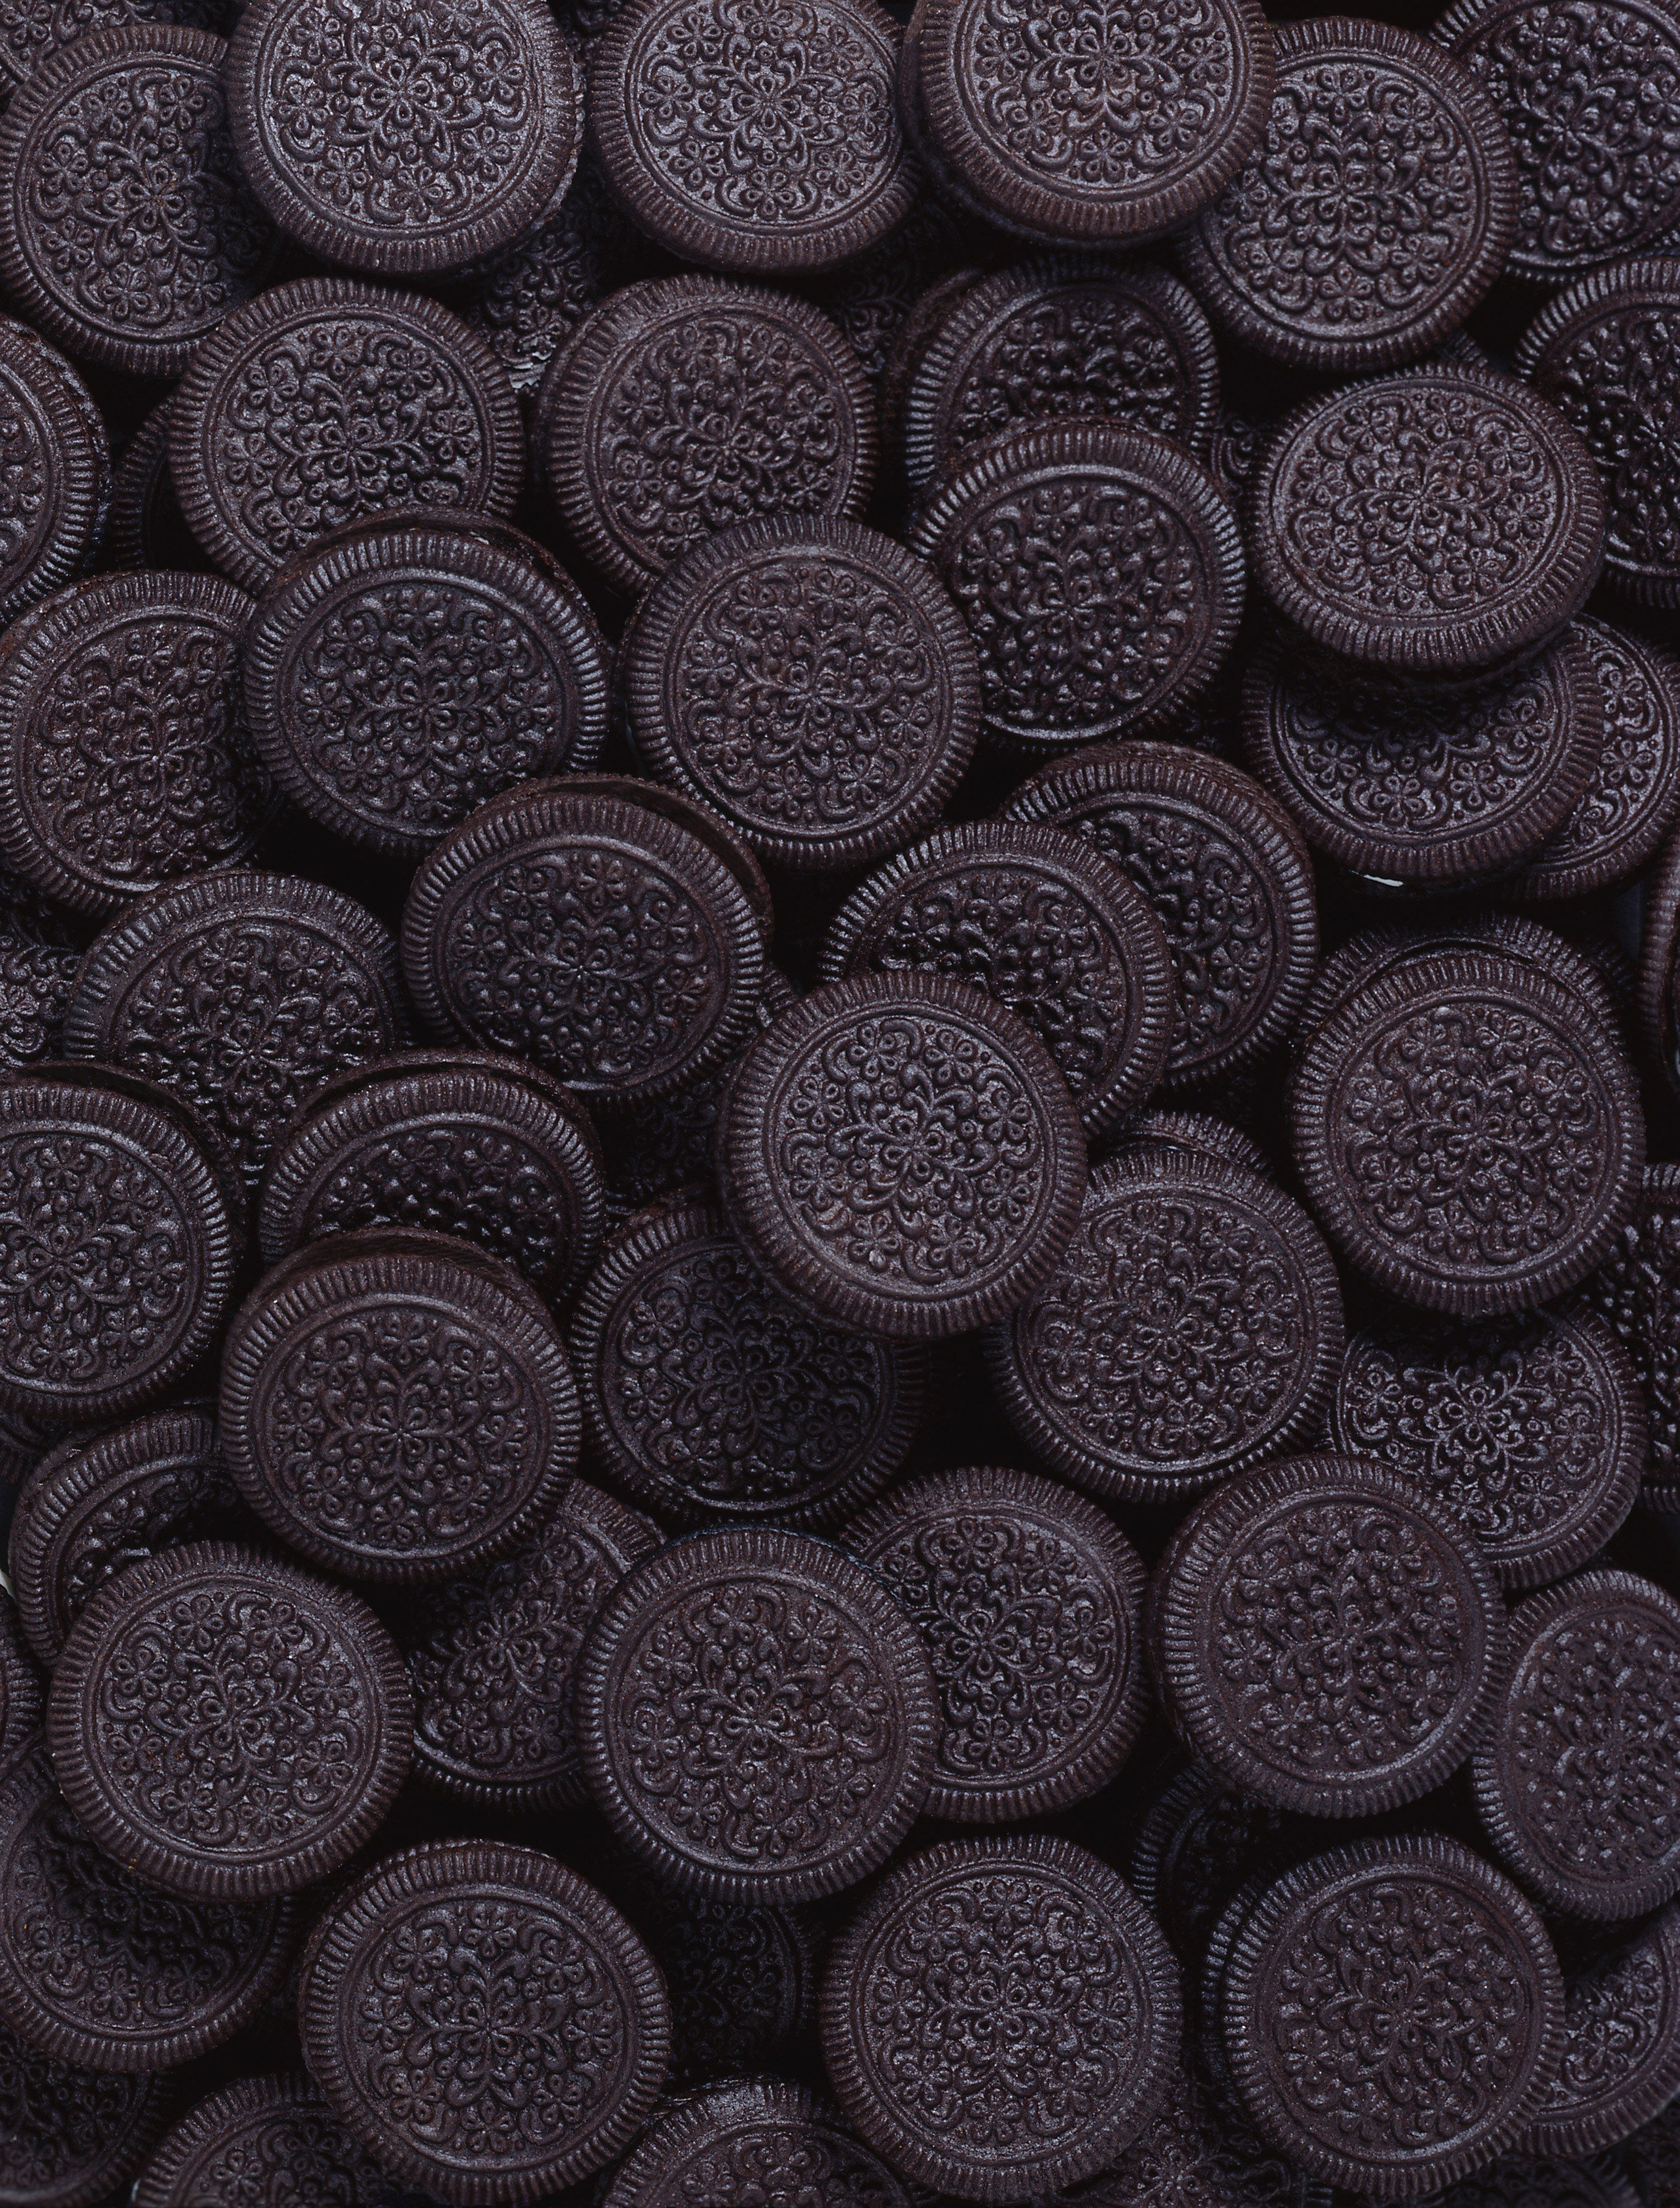 A close up of chocolate sandwich cookies in a pile. - Oreo